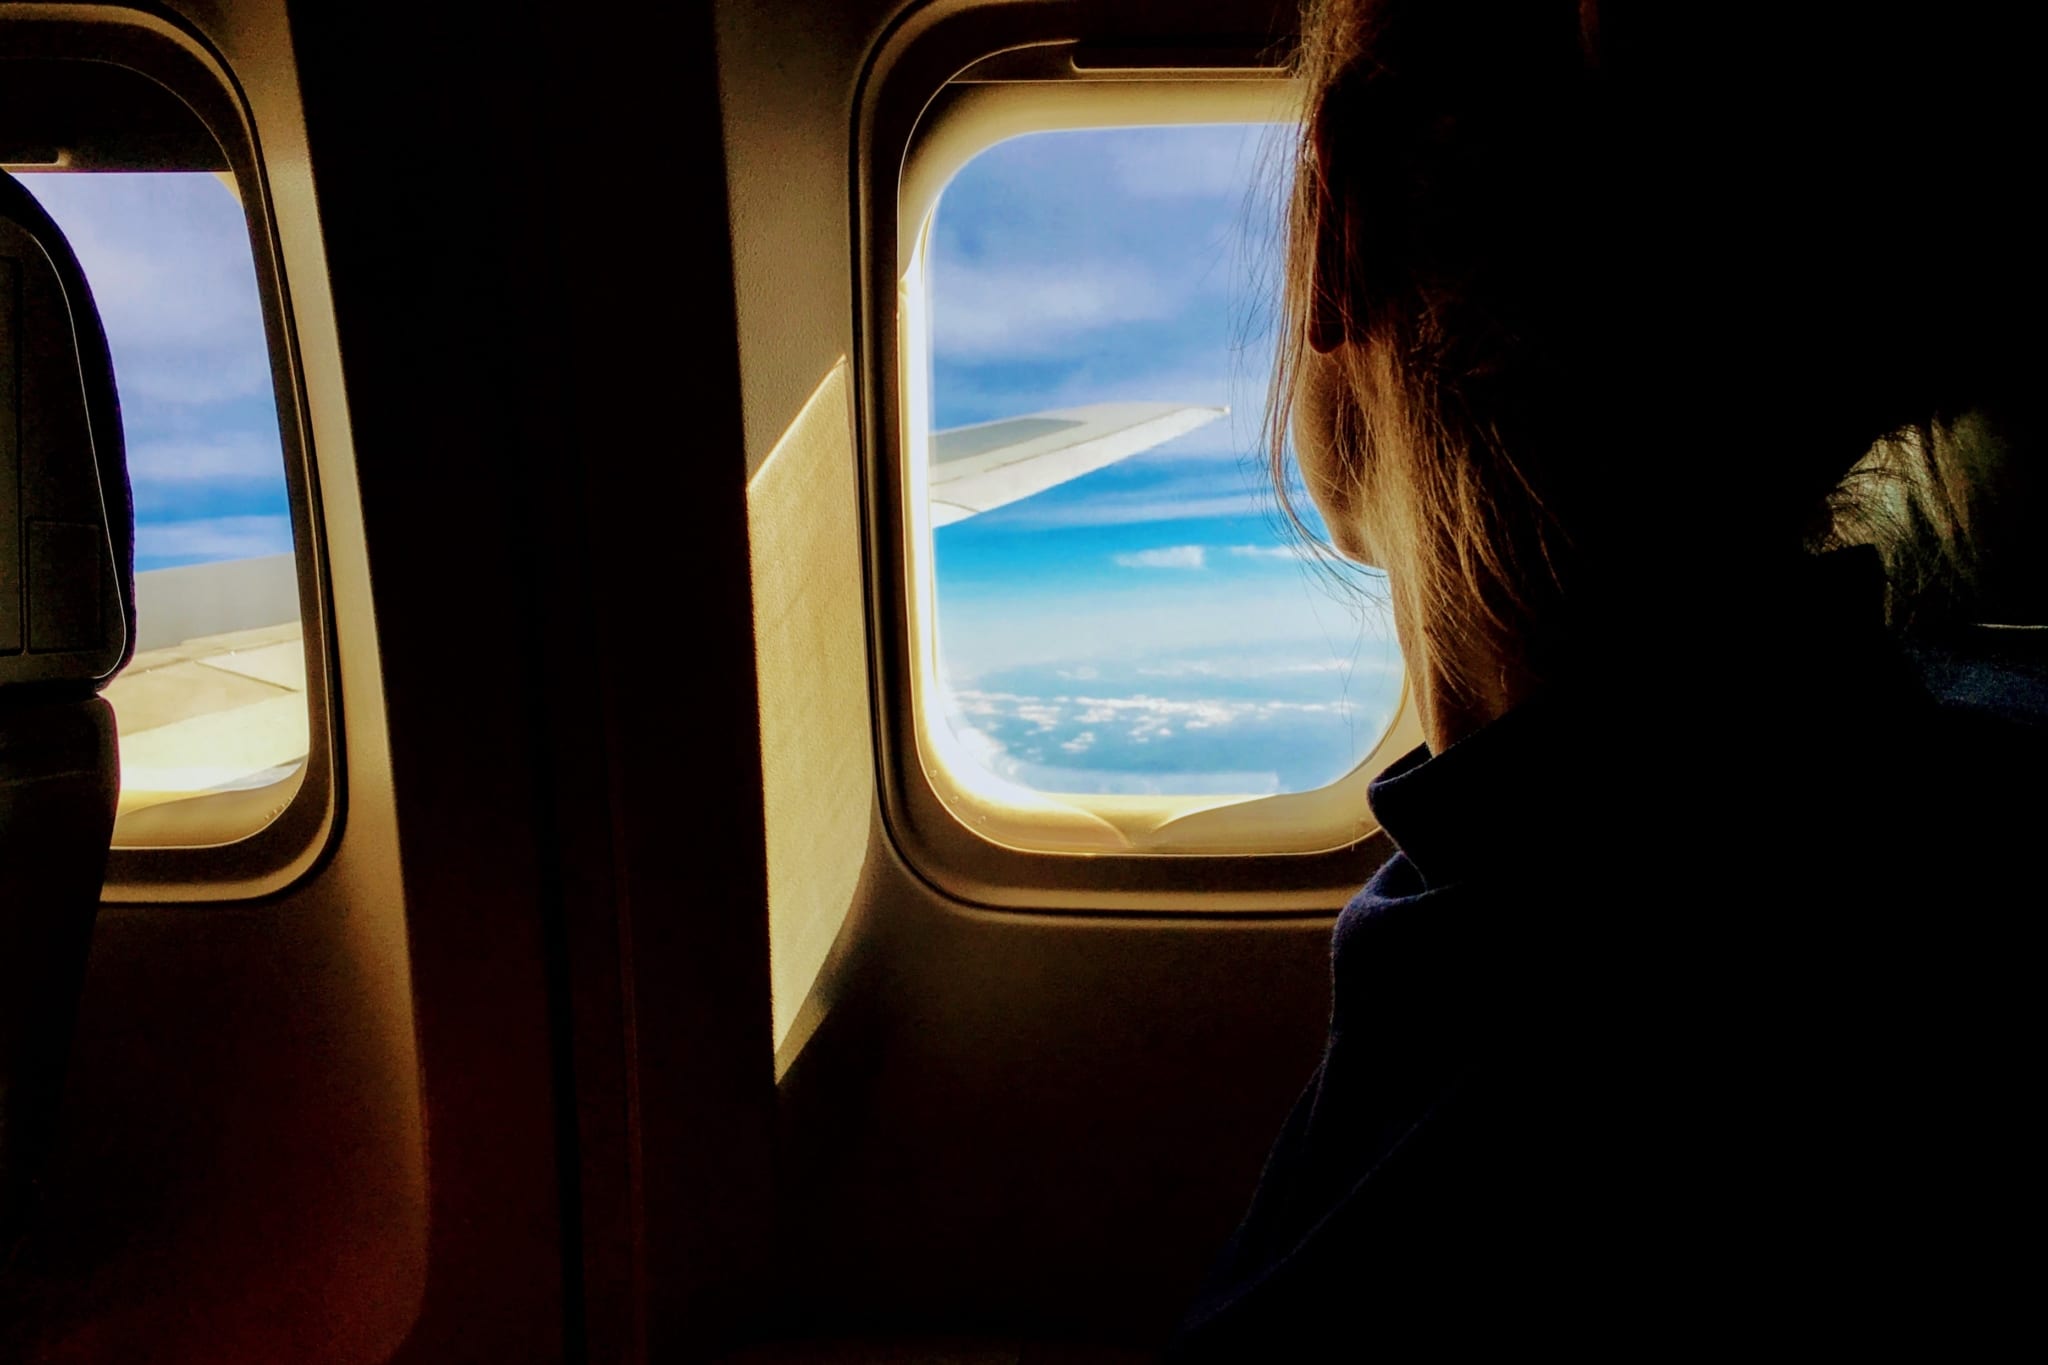 Person looks out window of airplane